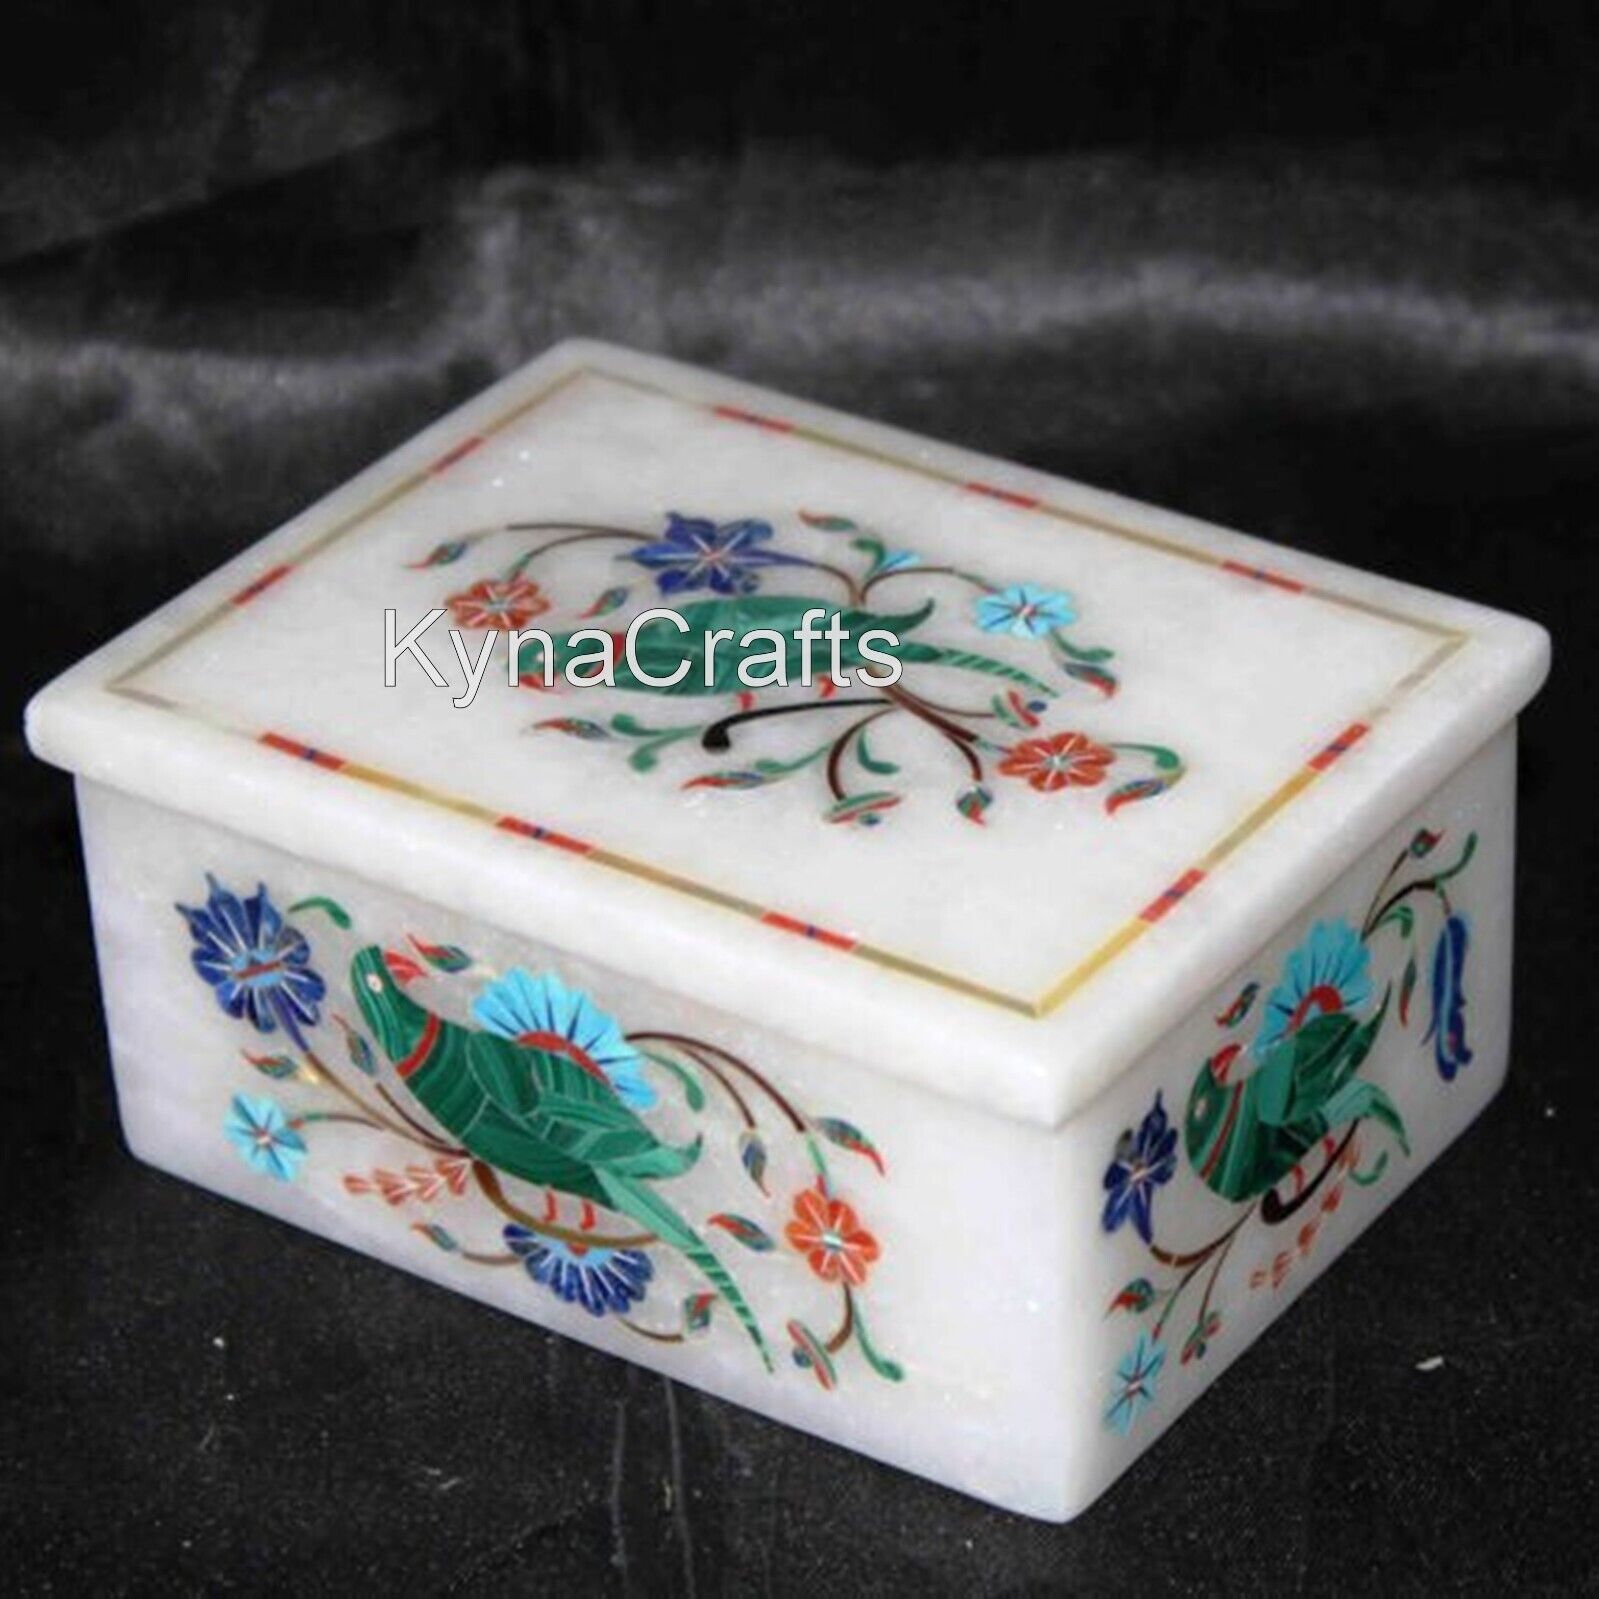 4 x 3 Inches White Marble Jewelry Box Parrot Pattern Inlay Work Stationary Box